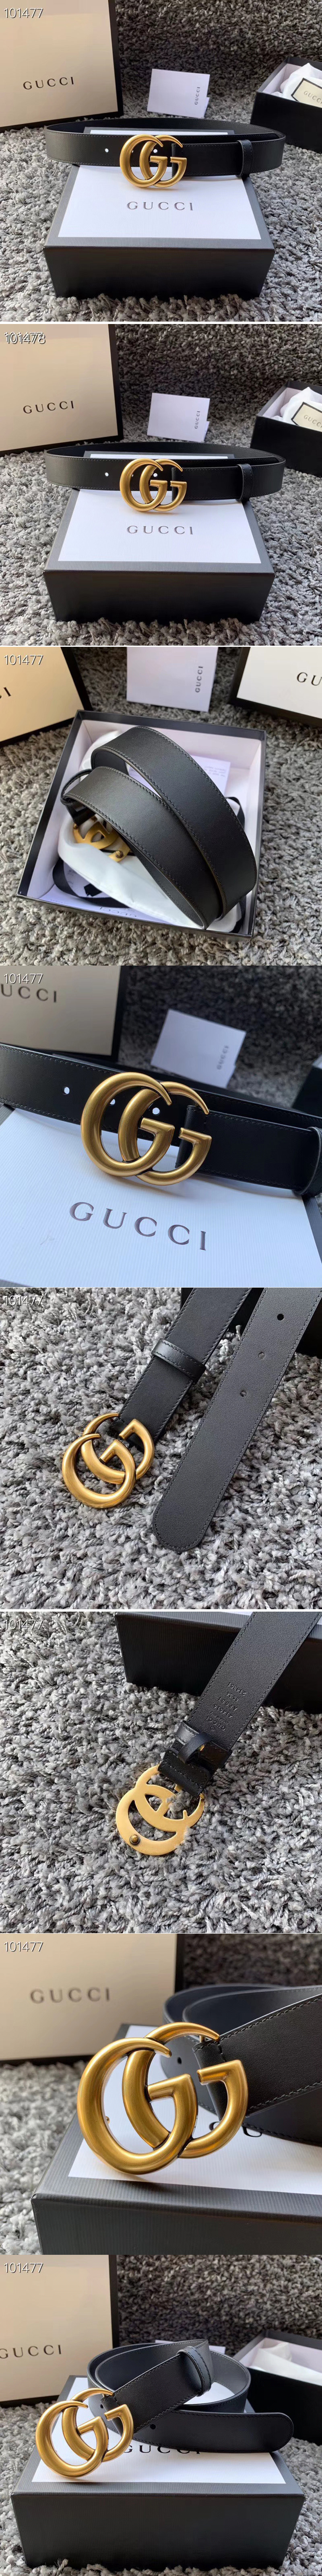 Replica Men's Gucci 414516 35mm Leather belt with Gold Double G buckle in Black Leather